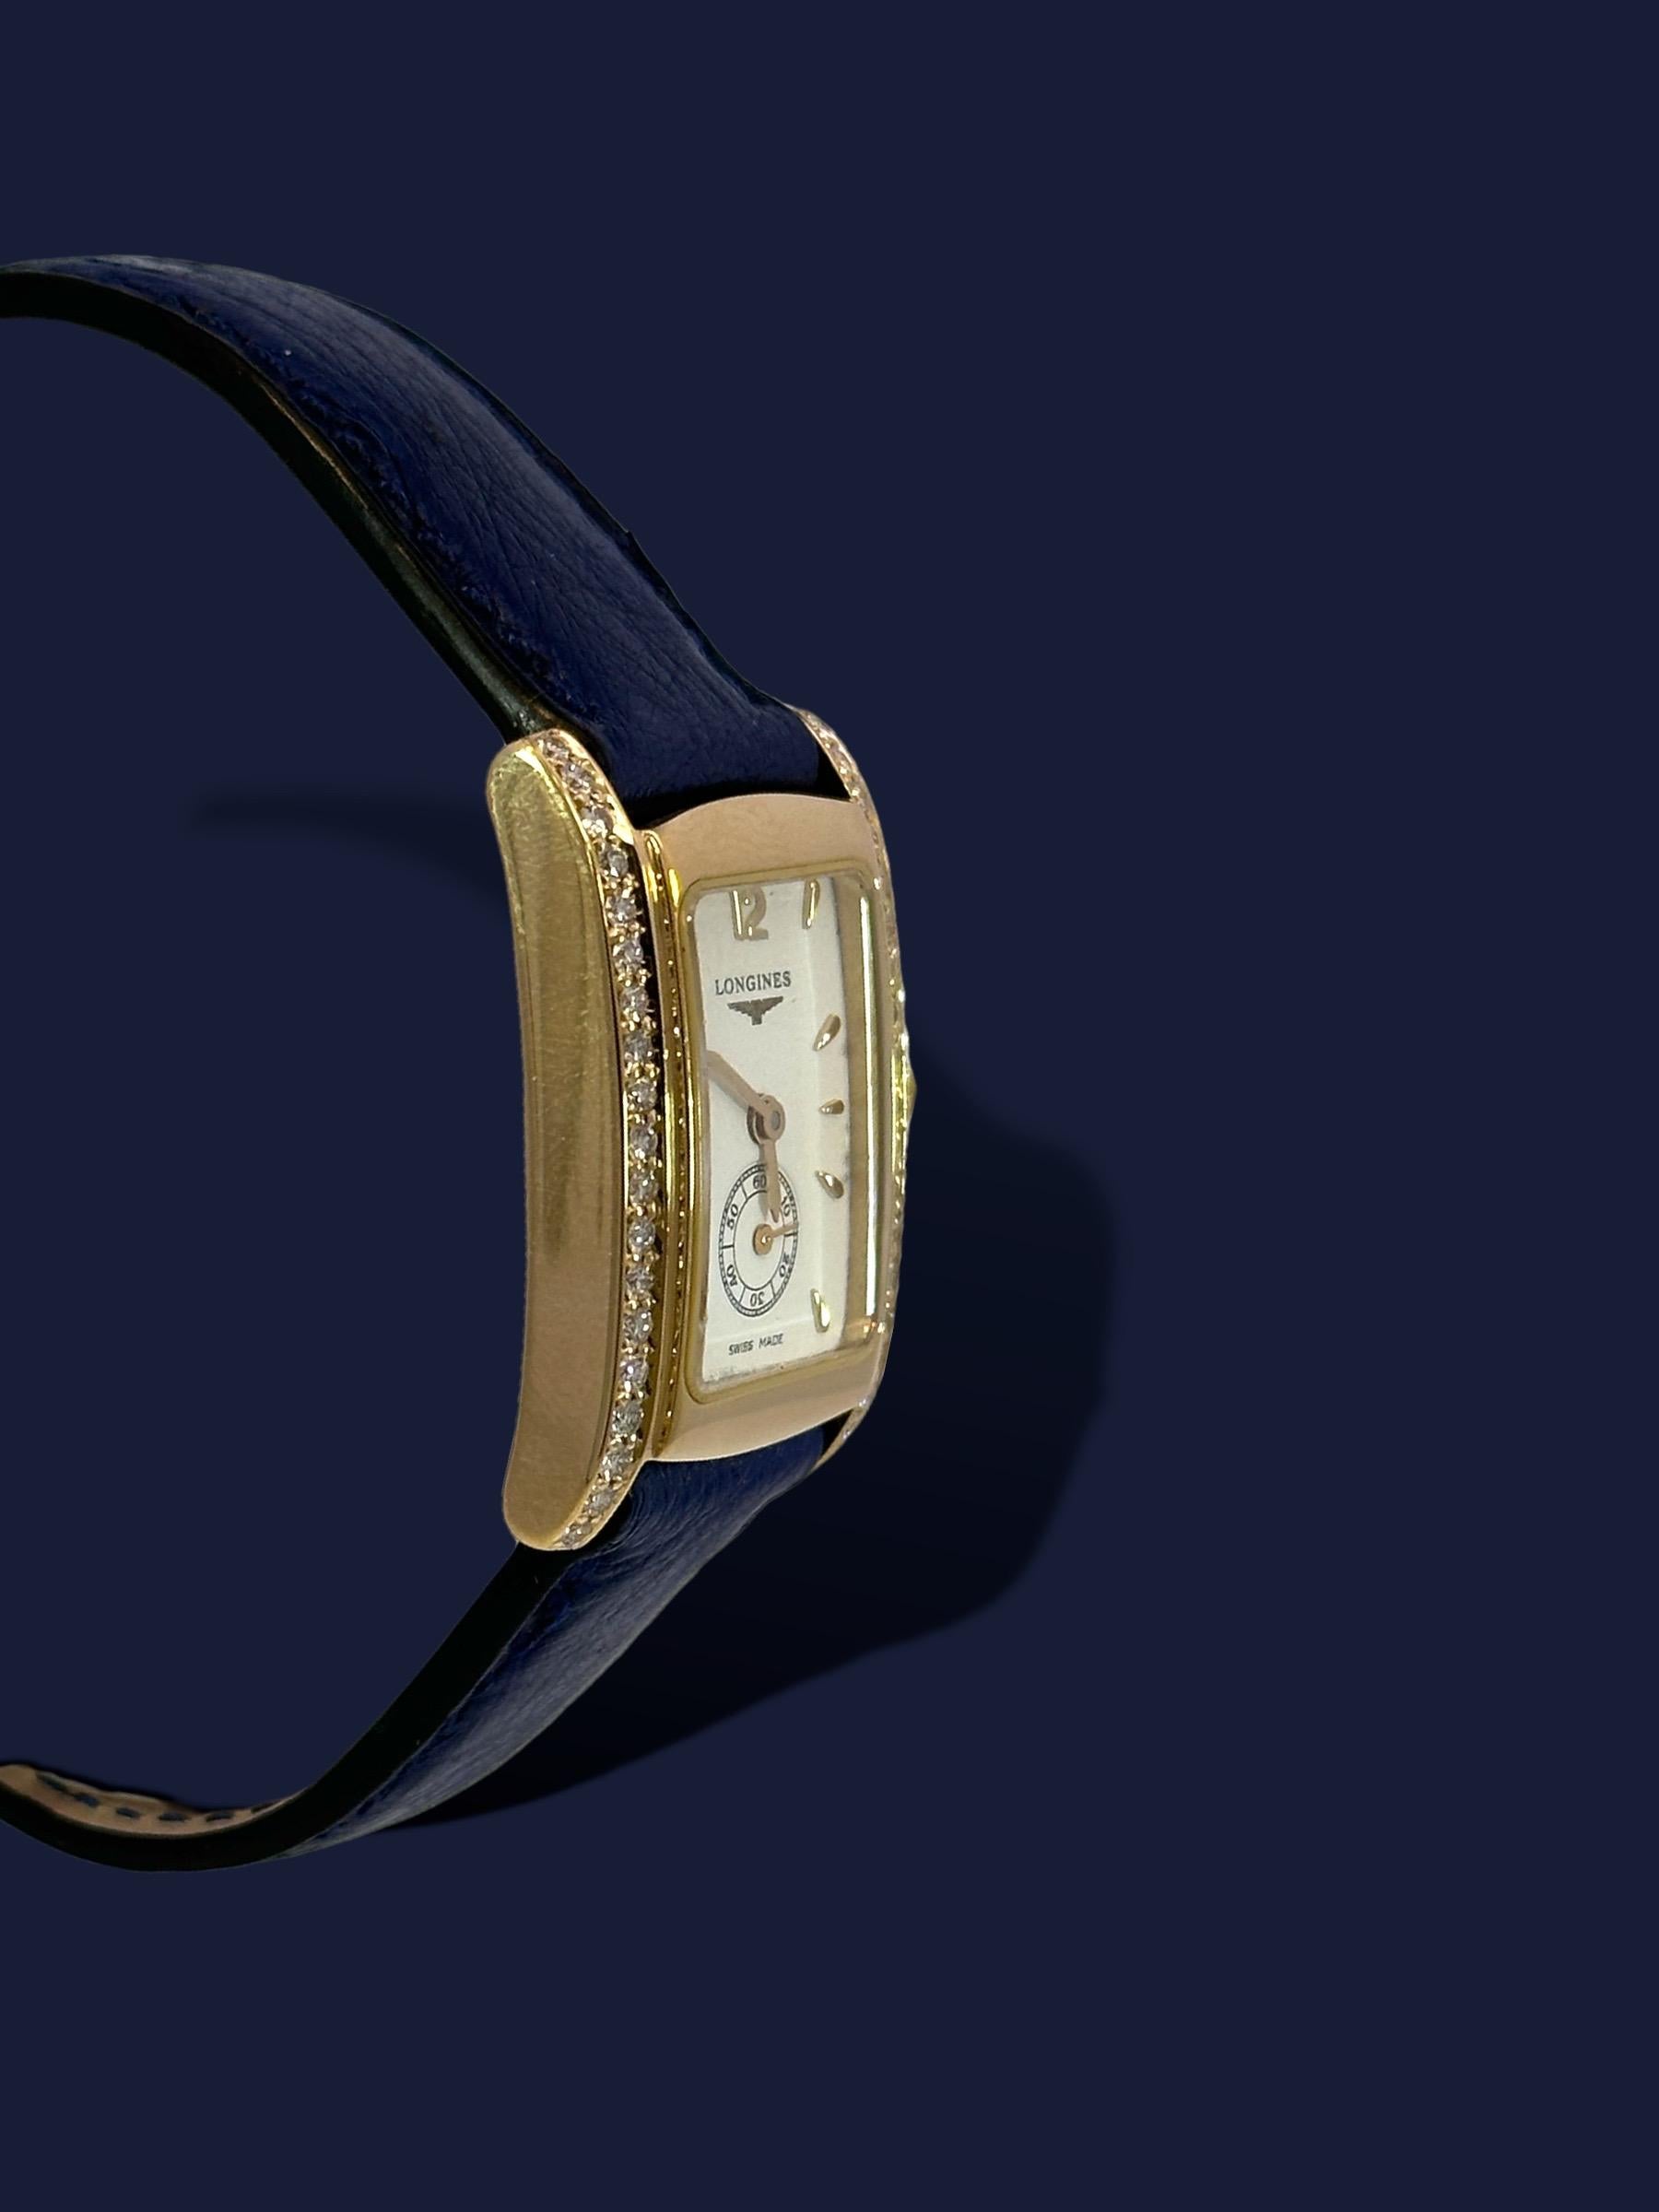 Brilliant Cut 18kt Yellow Gold Longines Dolce Vita Ladies Wrist Watch with Diamonds For Sale